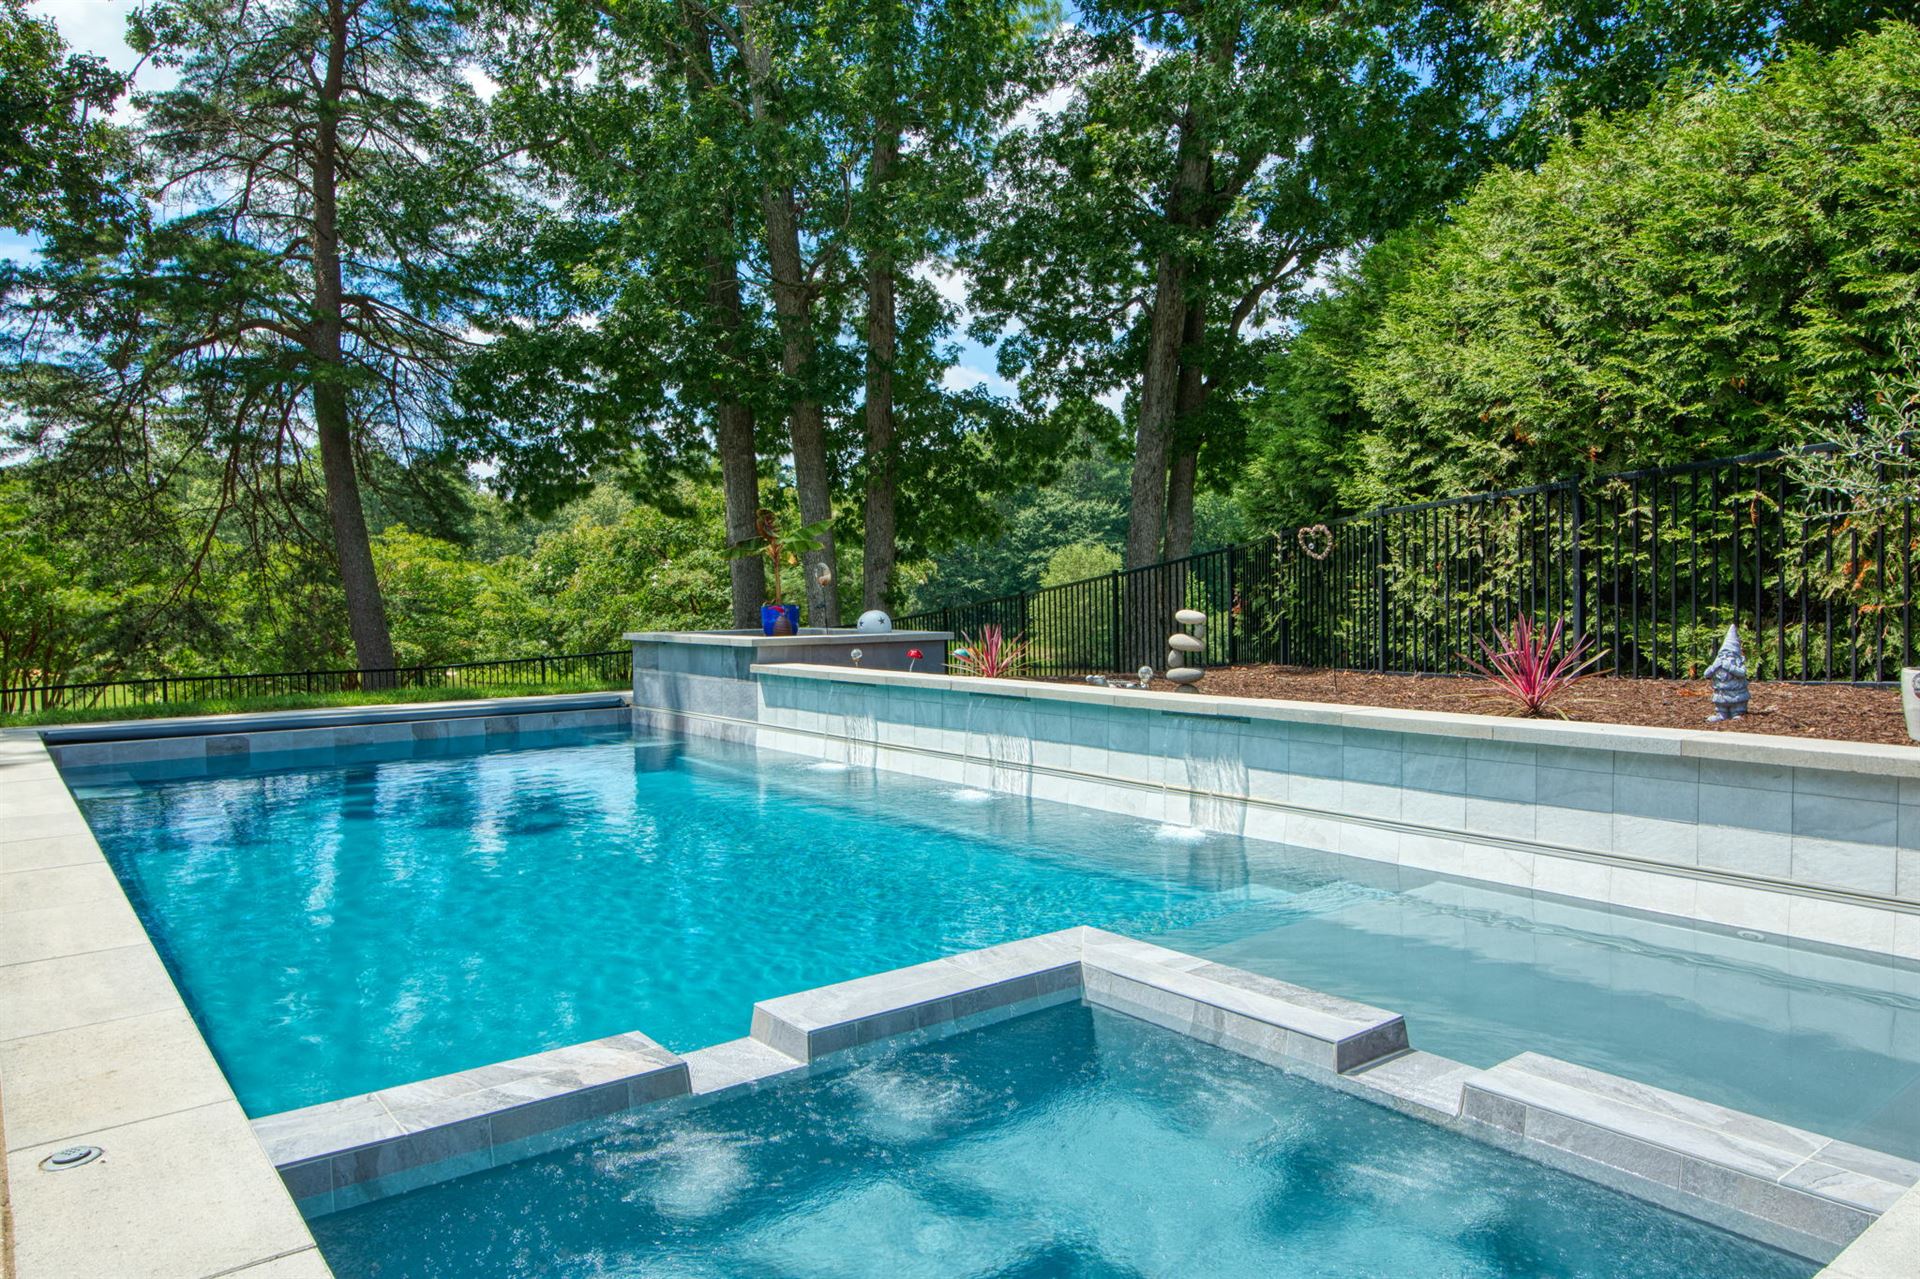 River Pools X36 in Diamond color with cascade, concrete paver patio, and natural stone coping